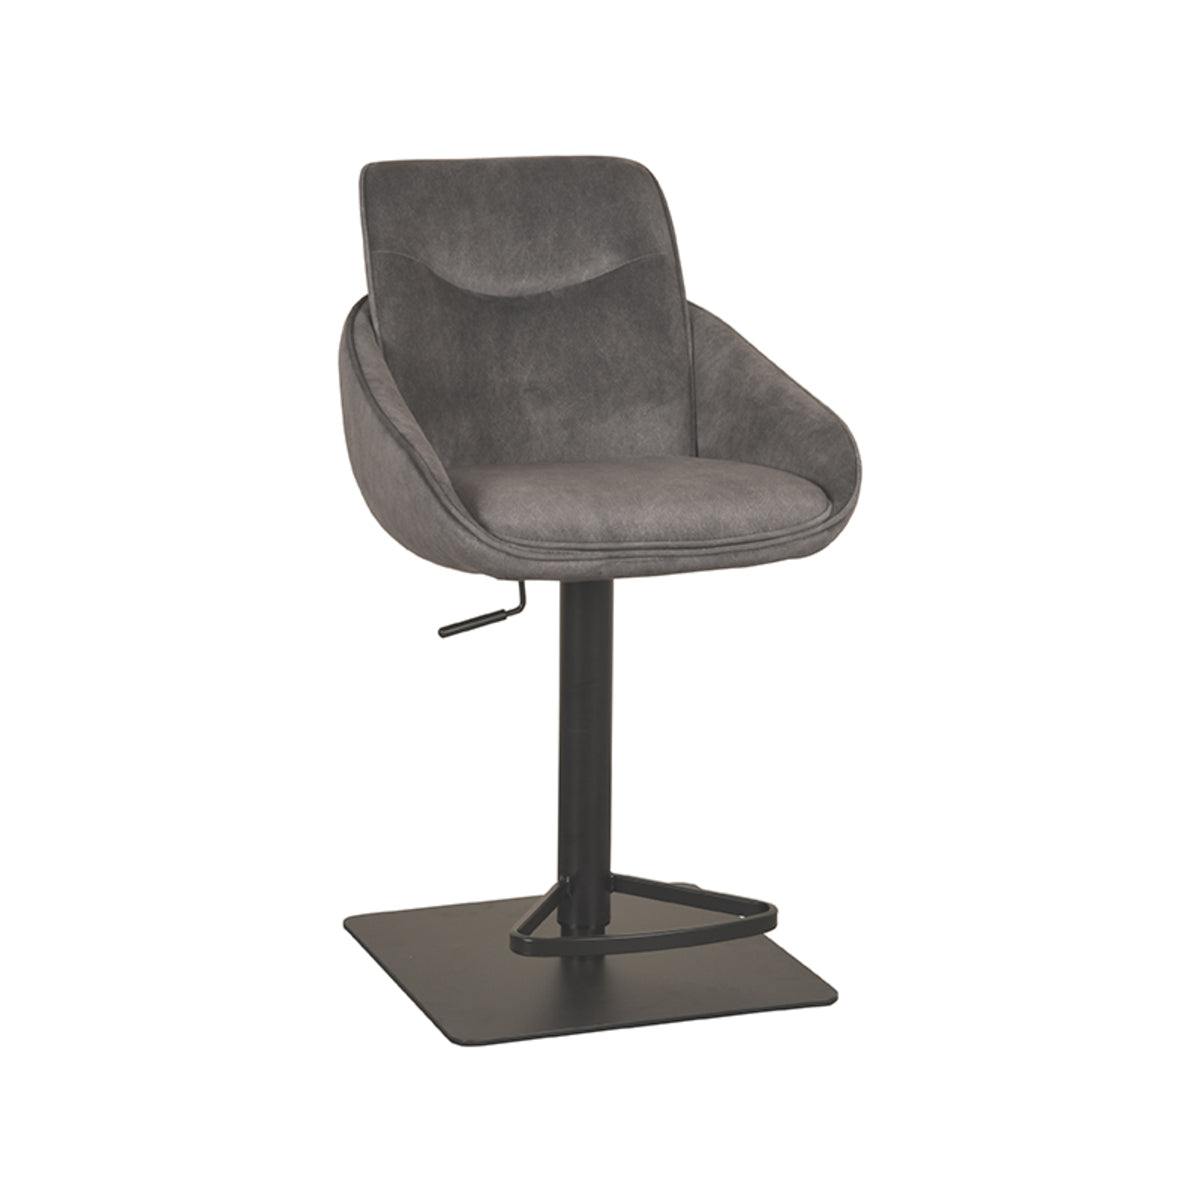 LABEL51 Bar stool Beauty - Anthracite - Cosmo